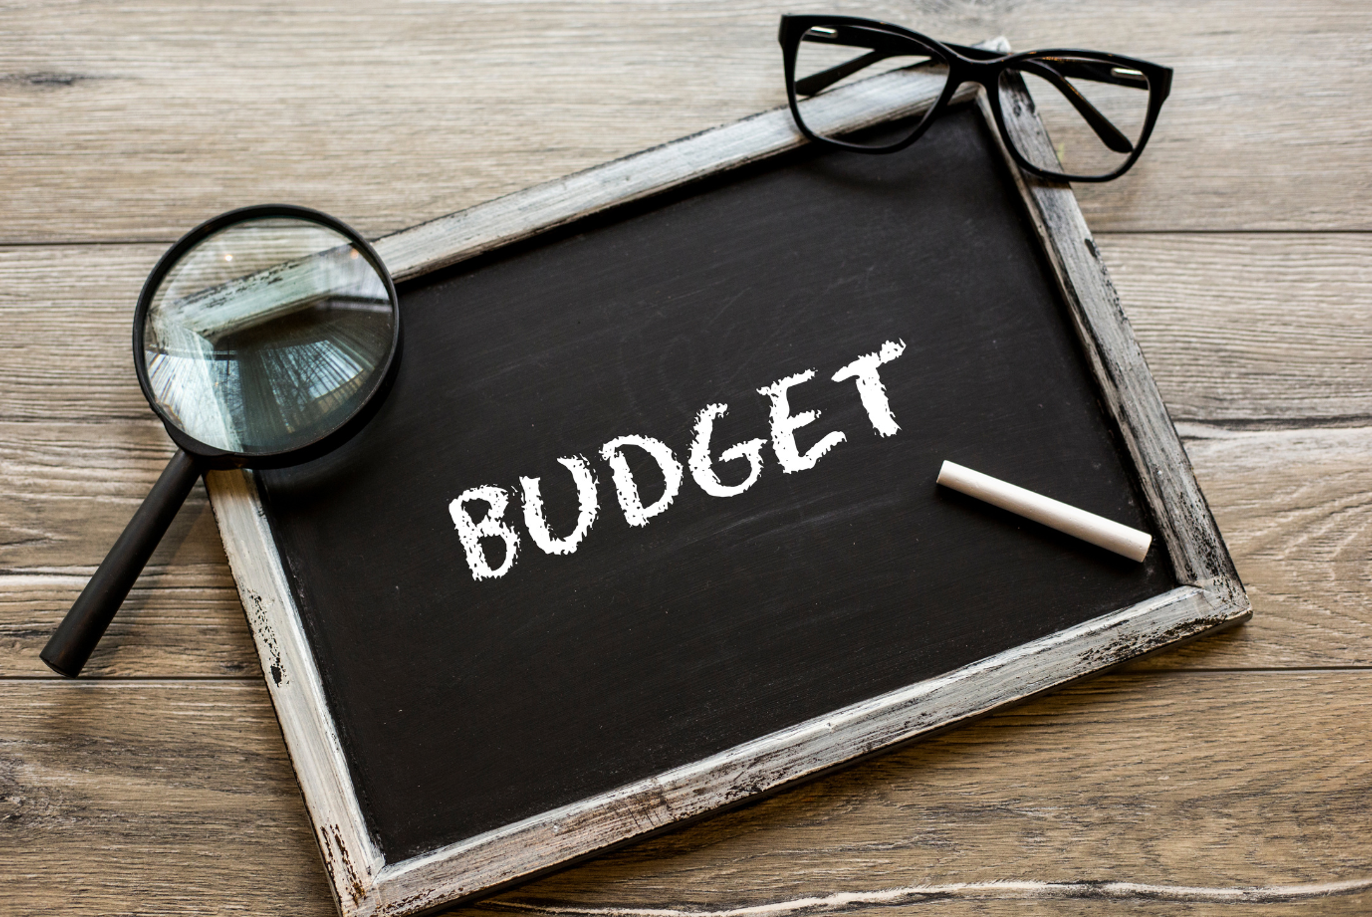 The word budget written on a blackboard with a piece of chalk, glasses, and magnifier lens on a wooden background.